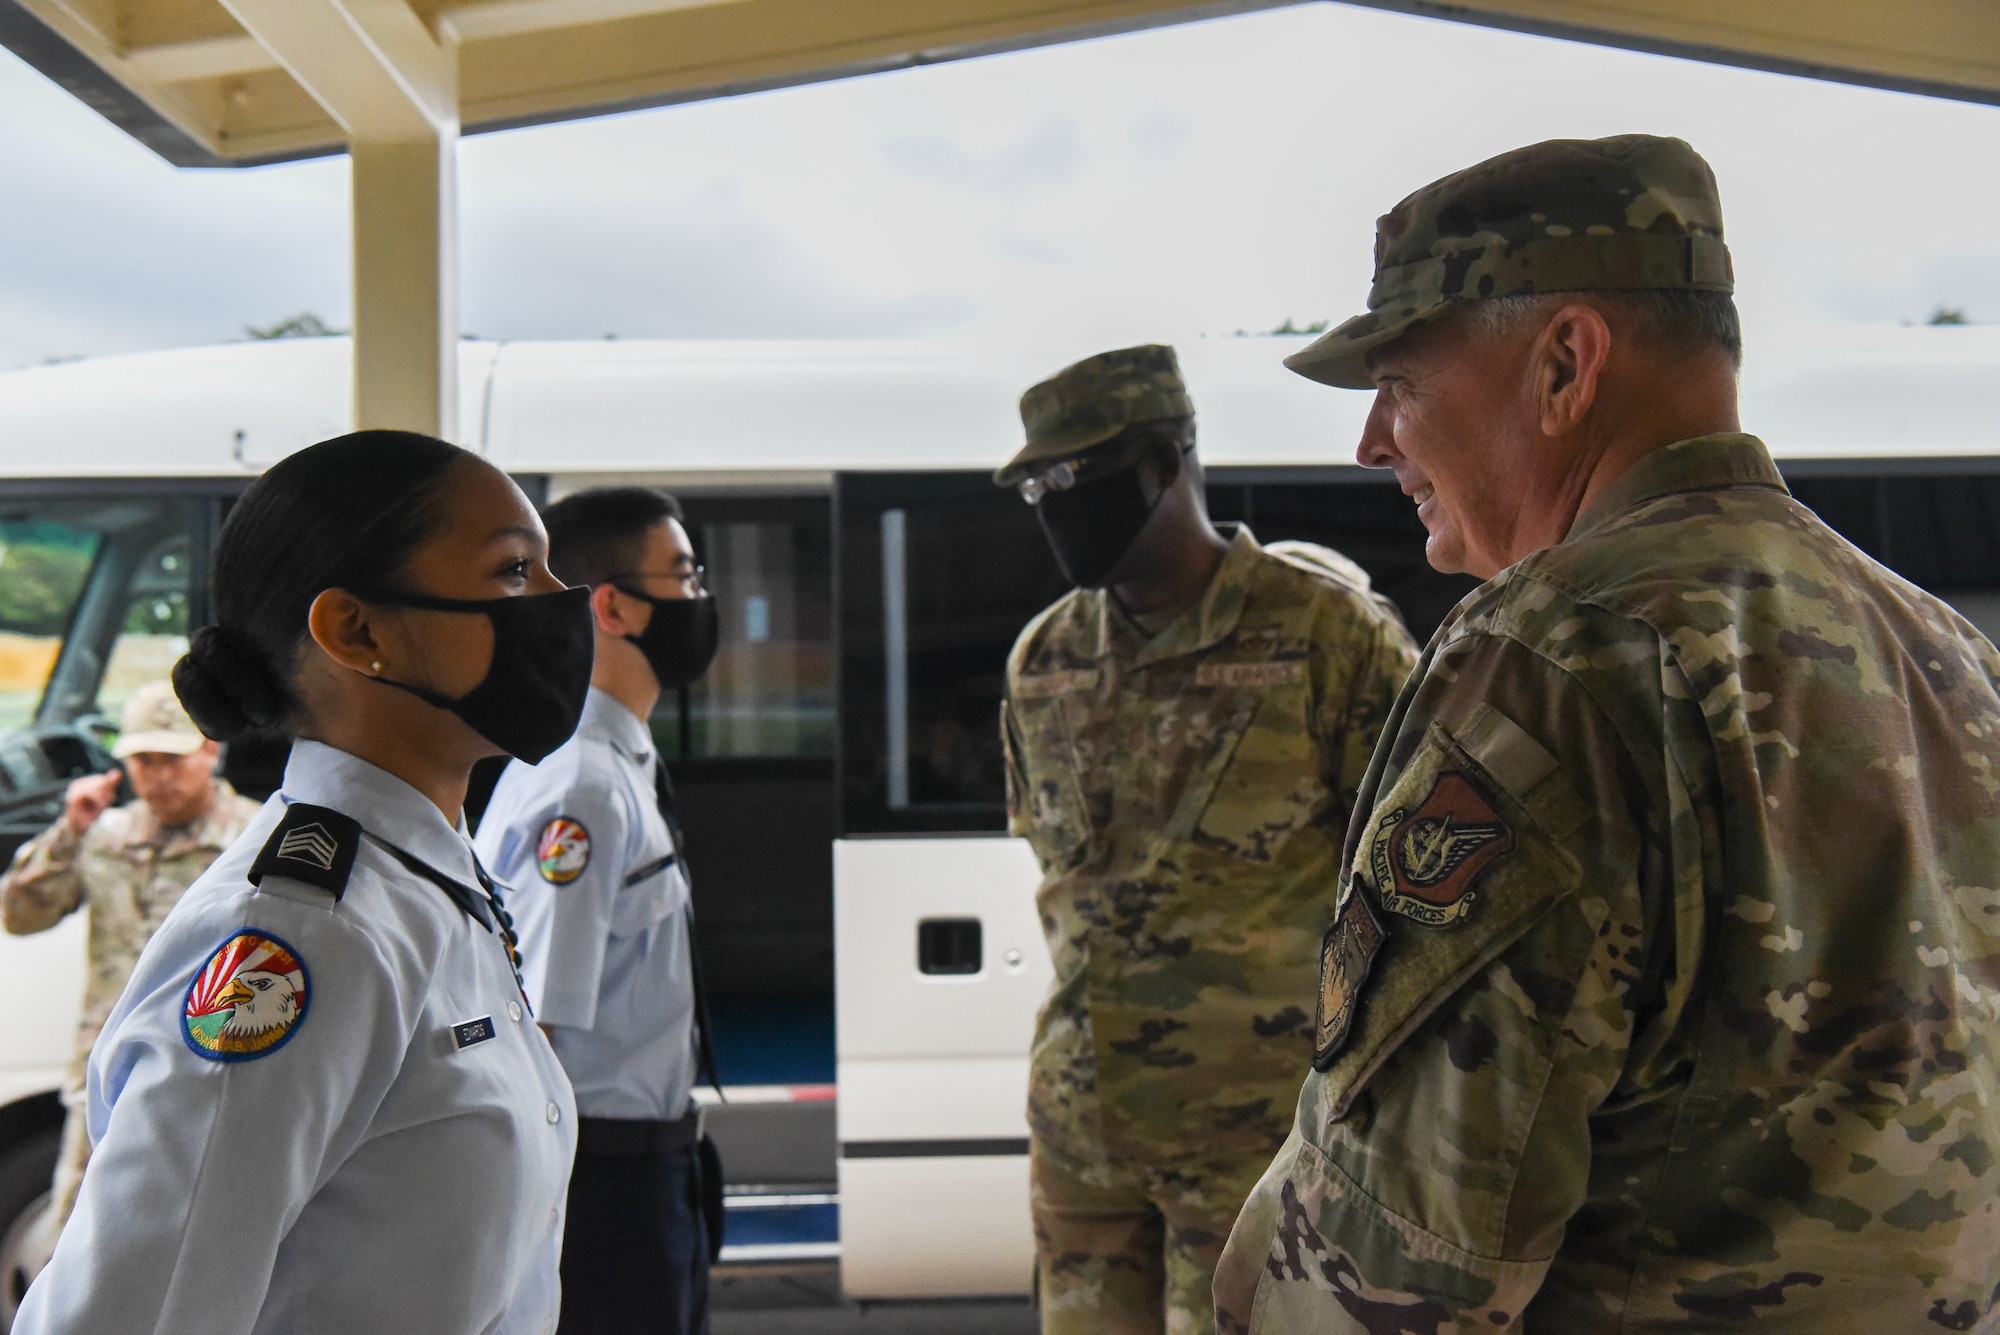 Two military members in uniform stand outside a school and talk to students in JROTC uniforms.